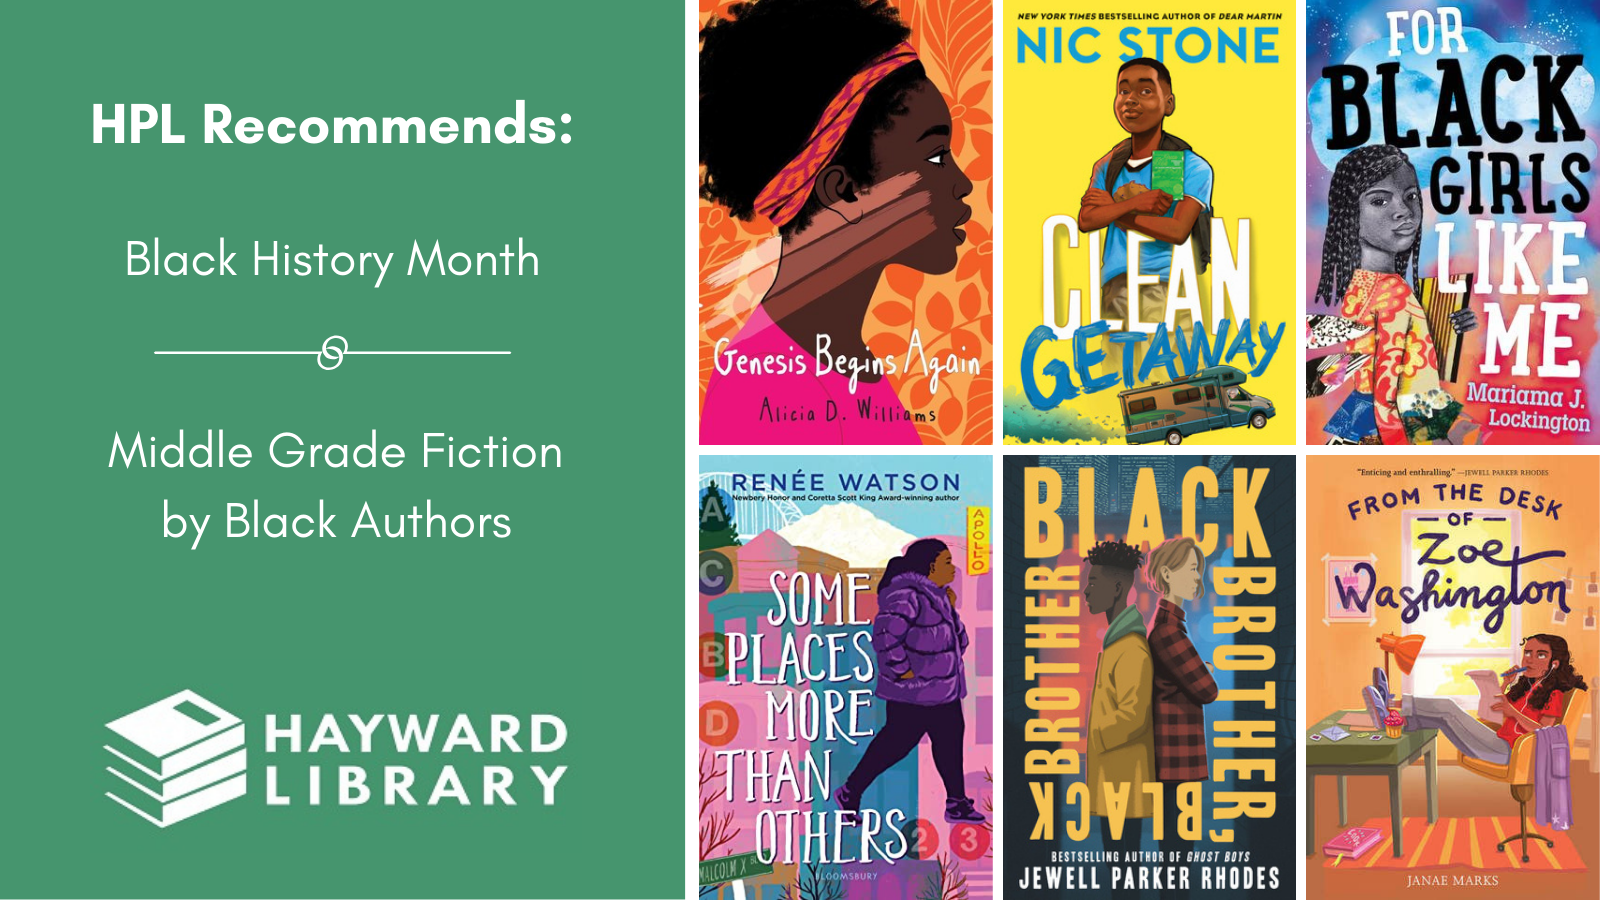 Collage of book covers with a green block on left side that says HPL Recommends, Black History Month, Middle Grade Fiction by Black Authors in white text, with Hayward Library logo below it.